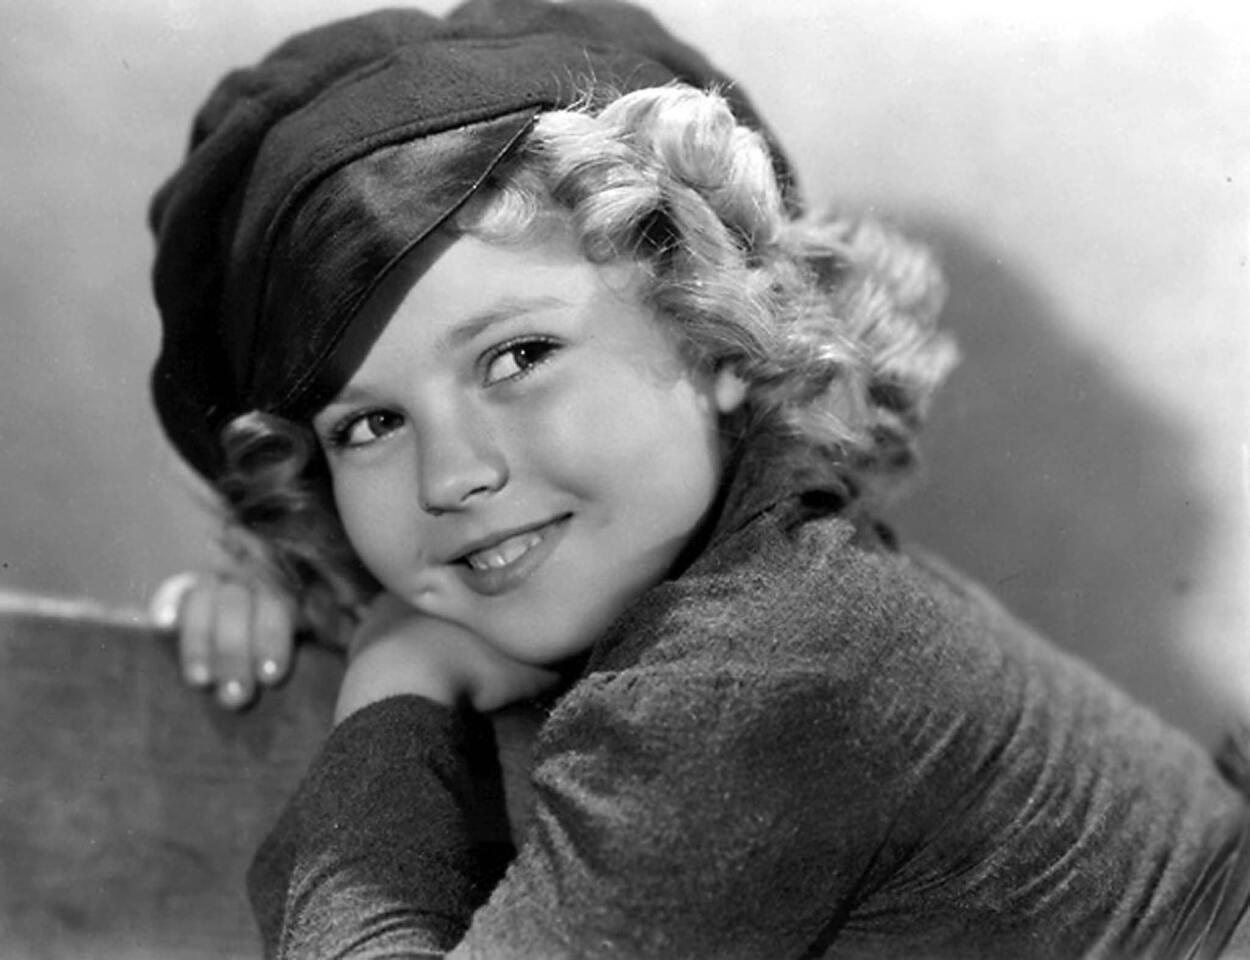 The curly-haired child star lifted a filmgoing nation's spirits during the Depression with her singing and dancing. She later returned to the spotlight as a diplomat. She was 85.